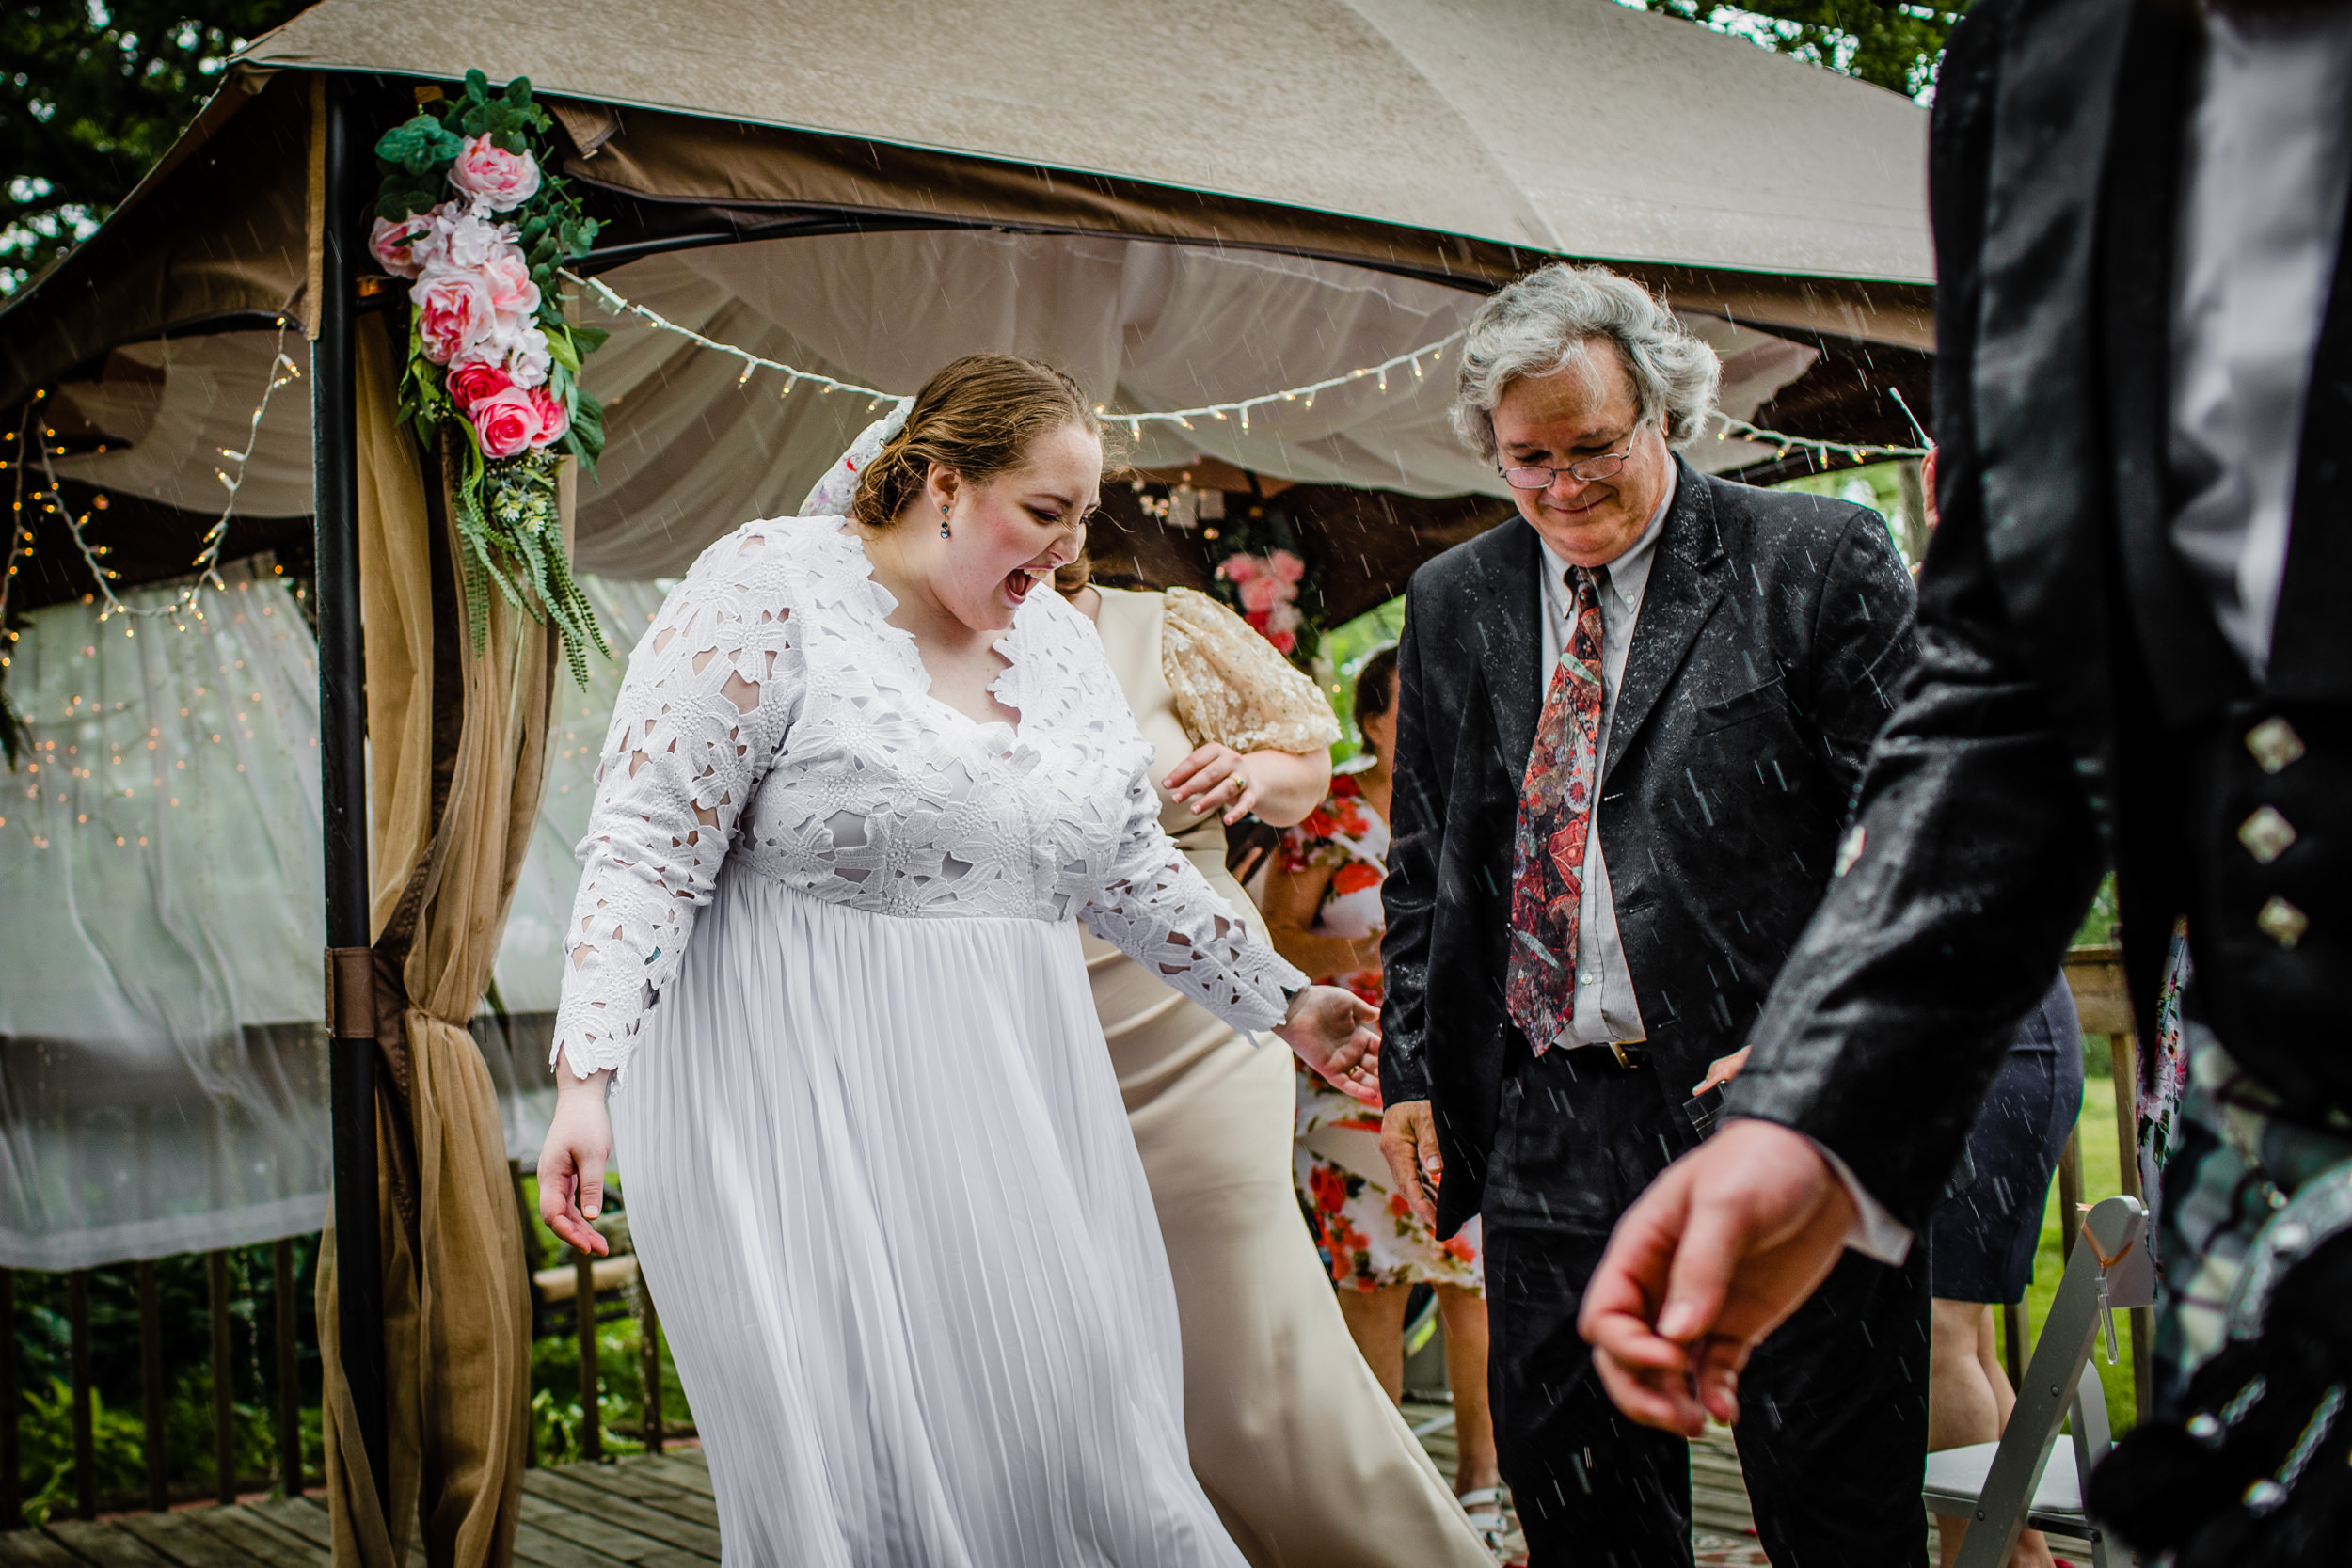 Guests run out of the rain at a backyard wedding in New Lenox, Illinois.